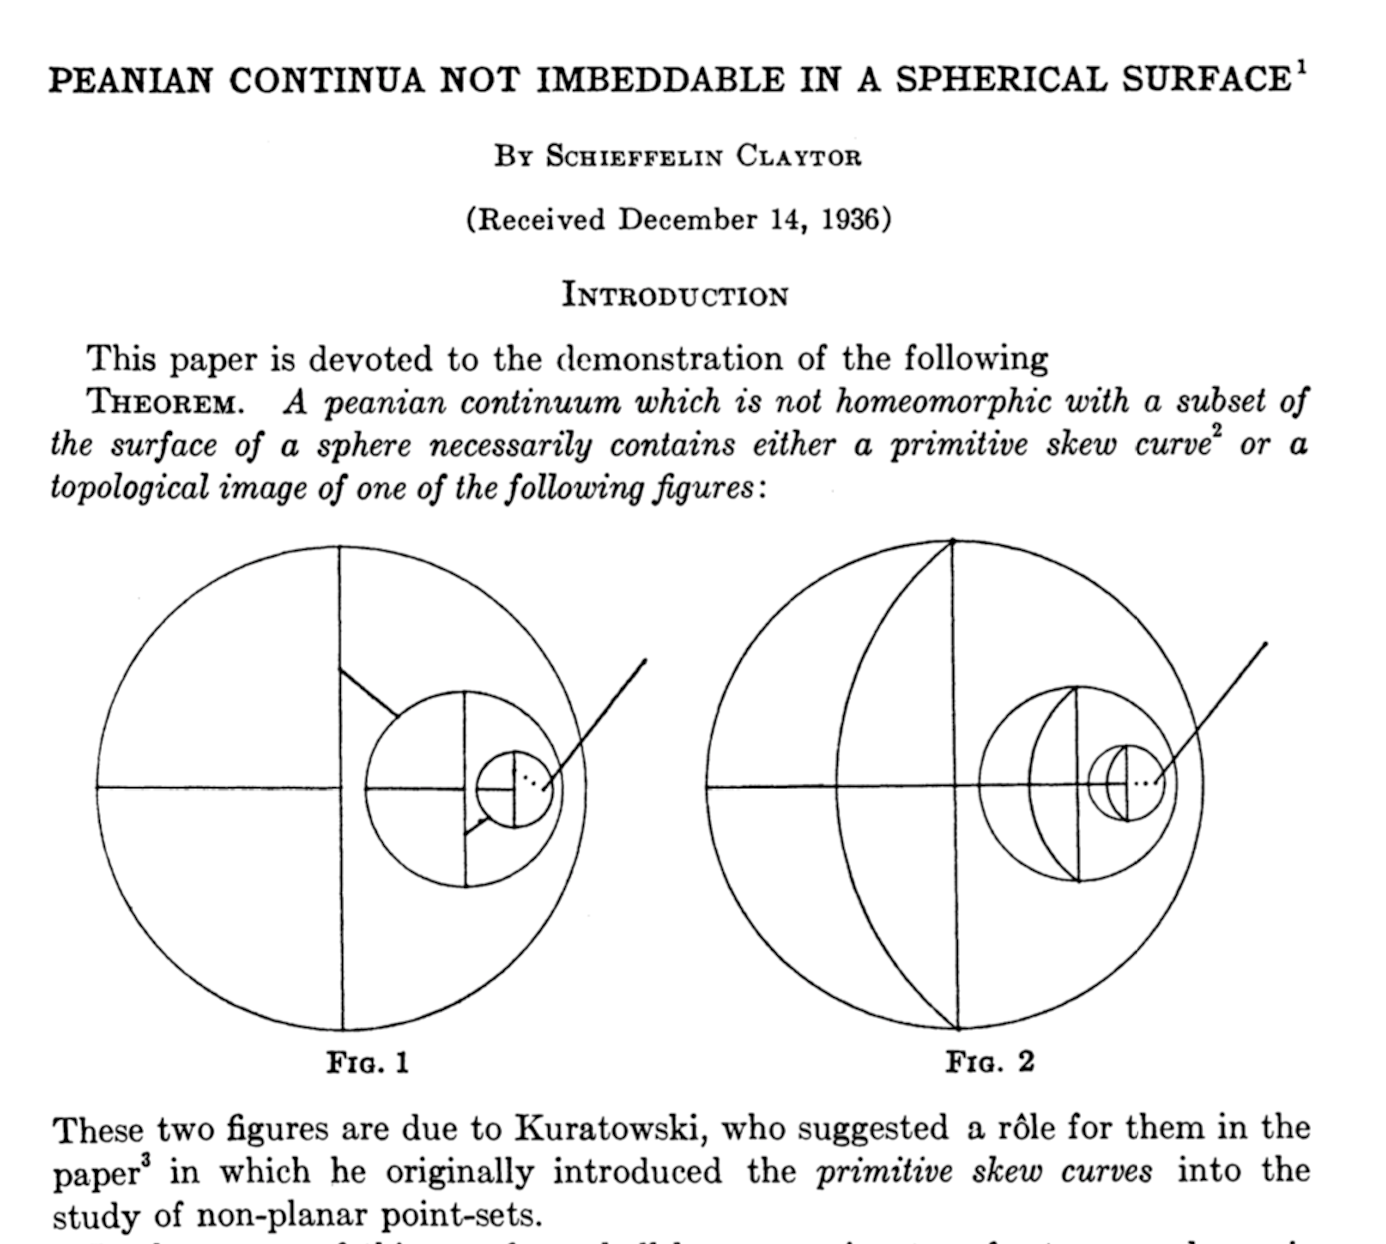 Peanian continua not imbeddable in a spherical surface by schieffelin claytor. this paper is devoted to the demonstration of the following. Theorem: a peanian continuum which is not homeomorphic with a subset of the surface of a sphere necessarily contains either a primitive skew curve or a topological image of one of the following figures, sshowing two circles. these two figures are due to Kuratowski, who suggested a role for them in the paper in which he originally introduced the primitive skew curves